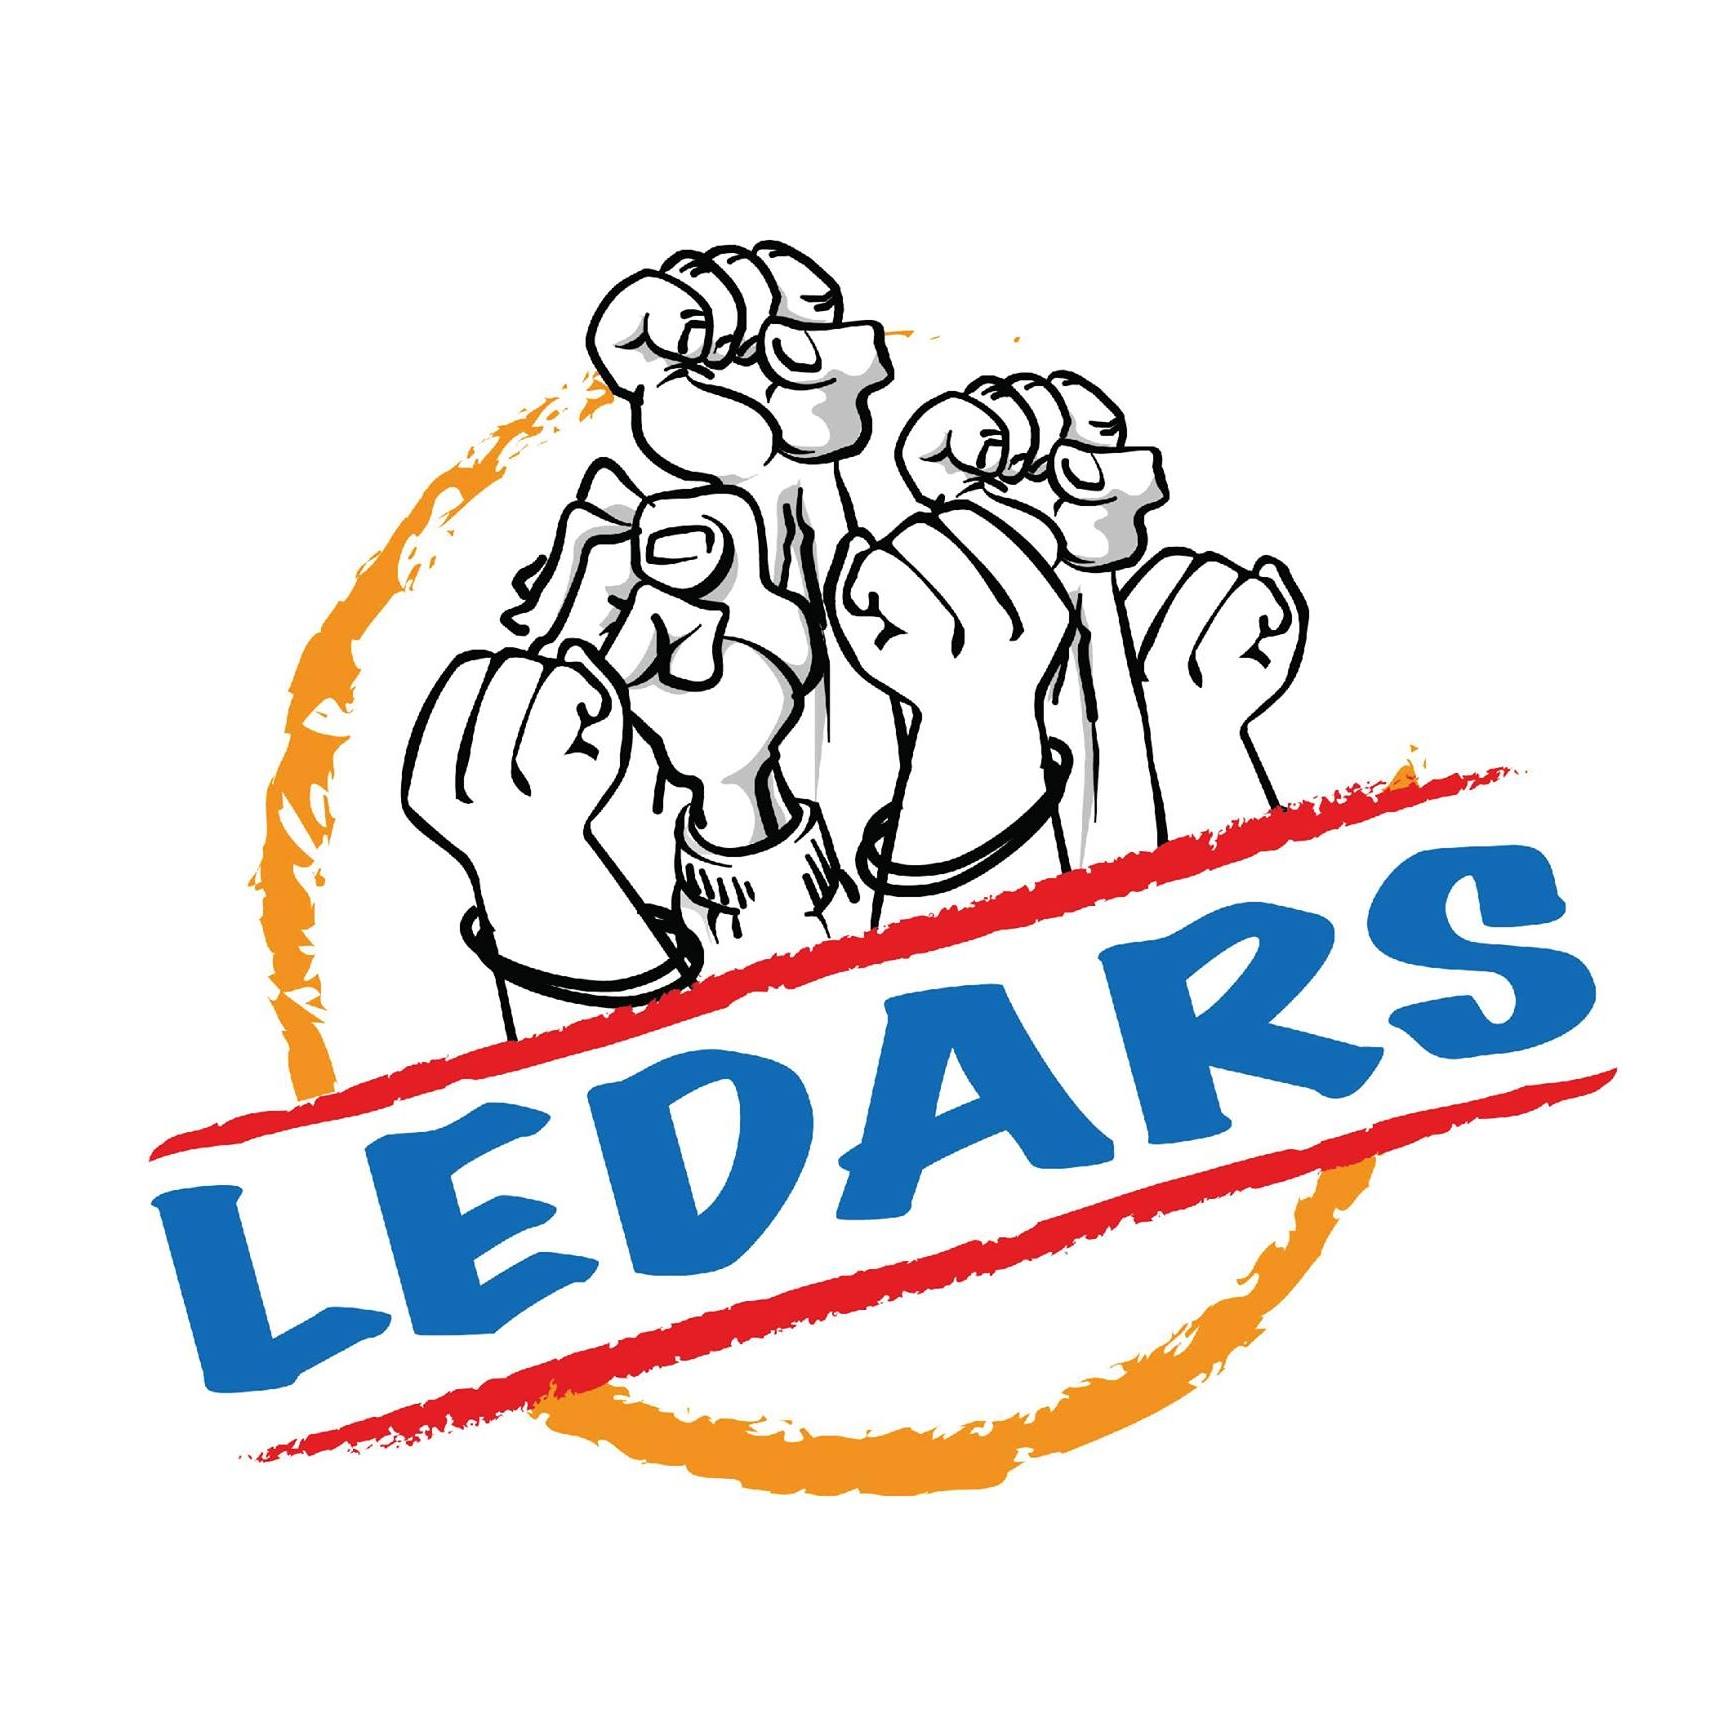 LEDARS (Local Environment Development and Agricultural Research Society)